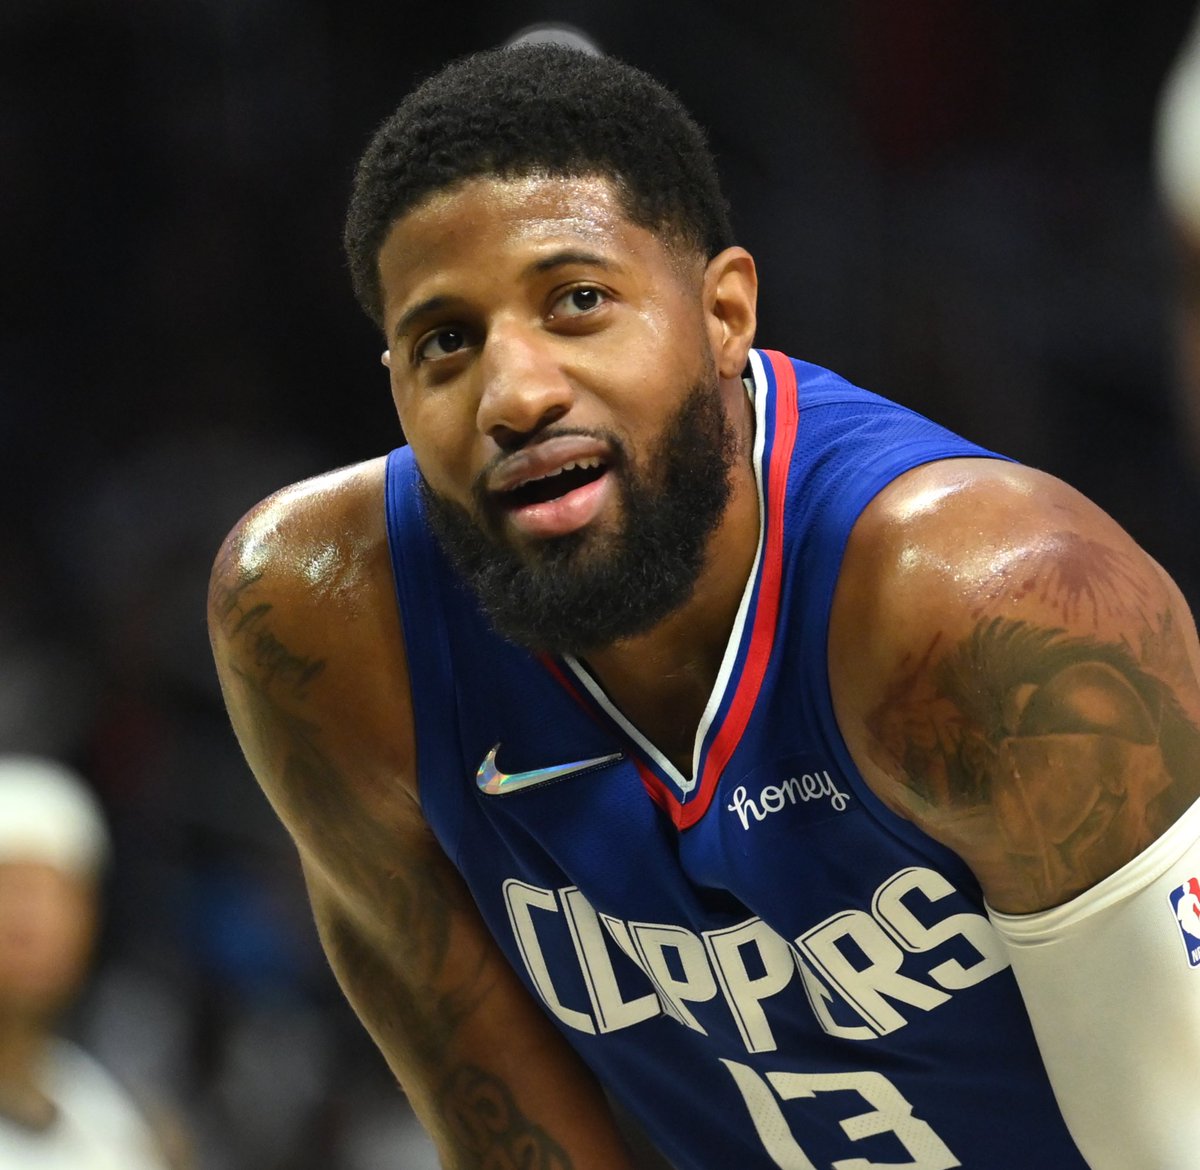 Report: The Clippers and Knicks have been in contact regarding a Paul George trade, per @IanBegley